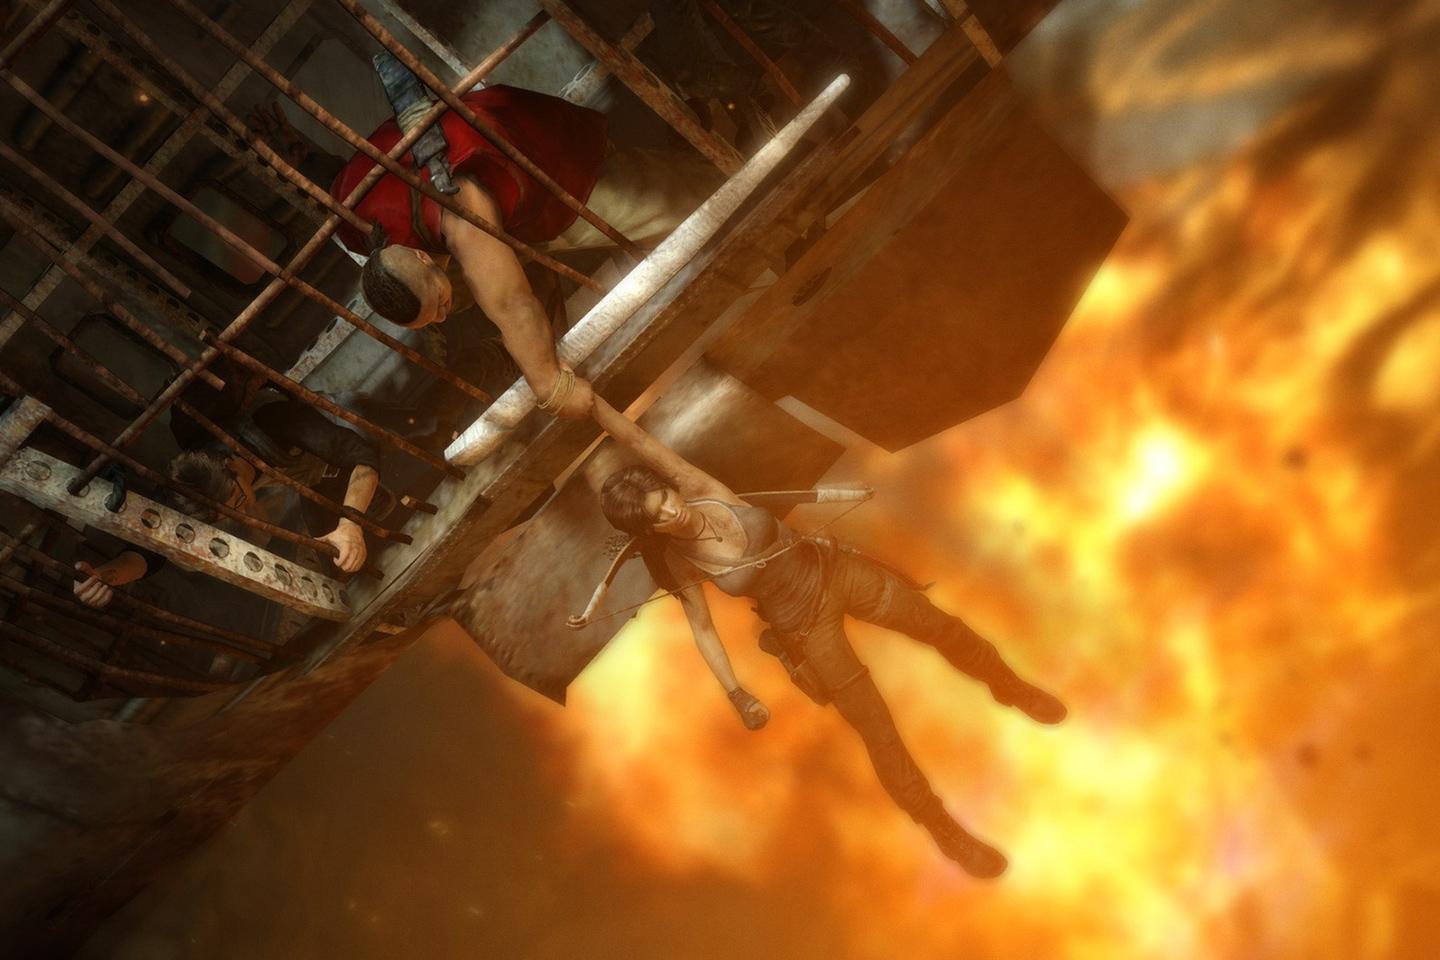 Lara being held up by person in cage as she dangles over lava.